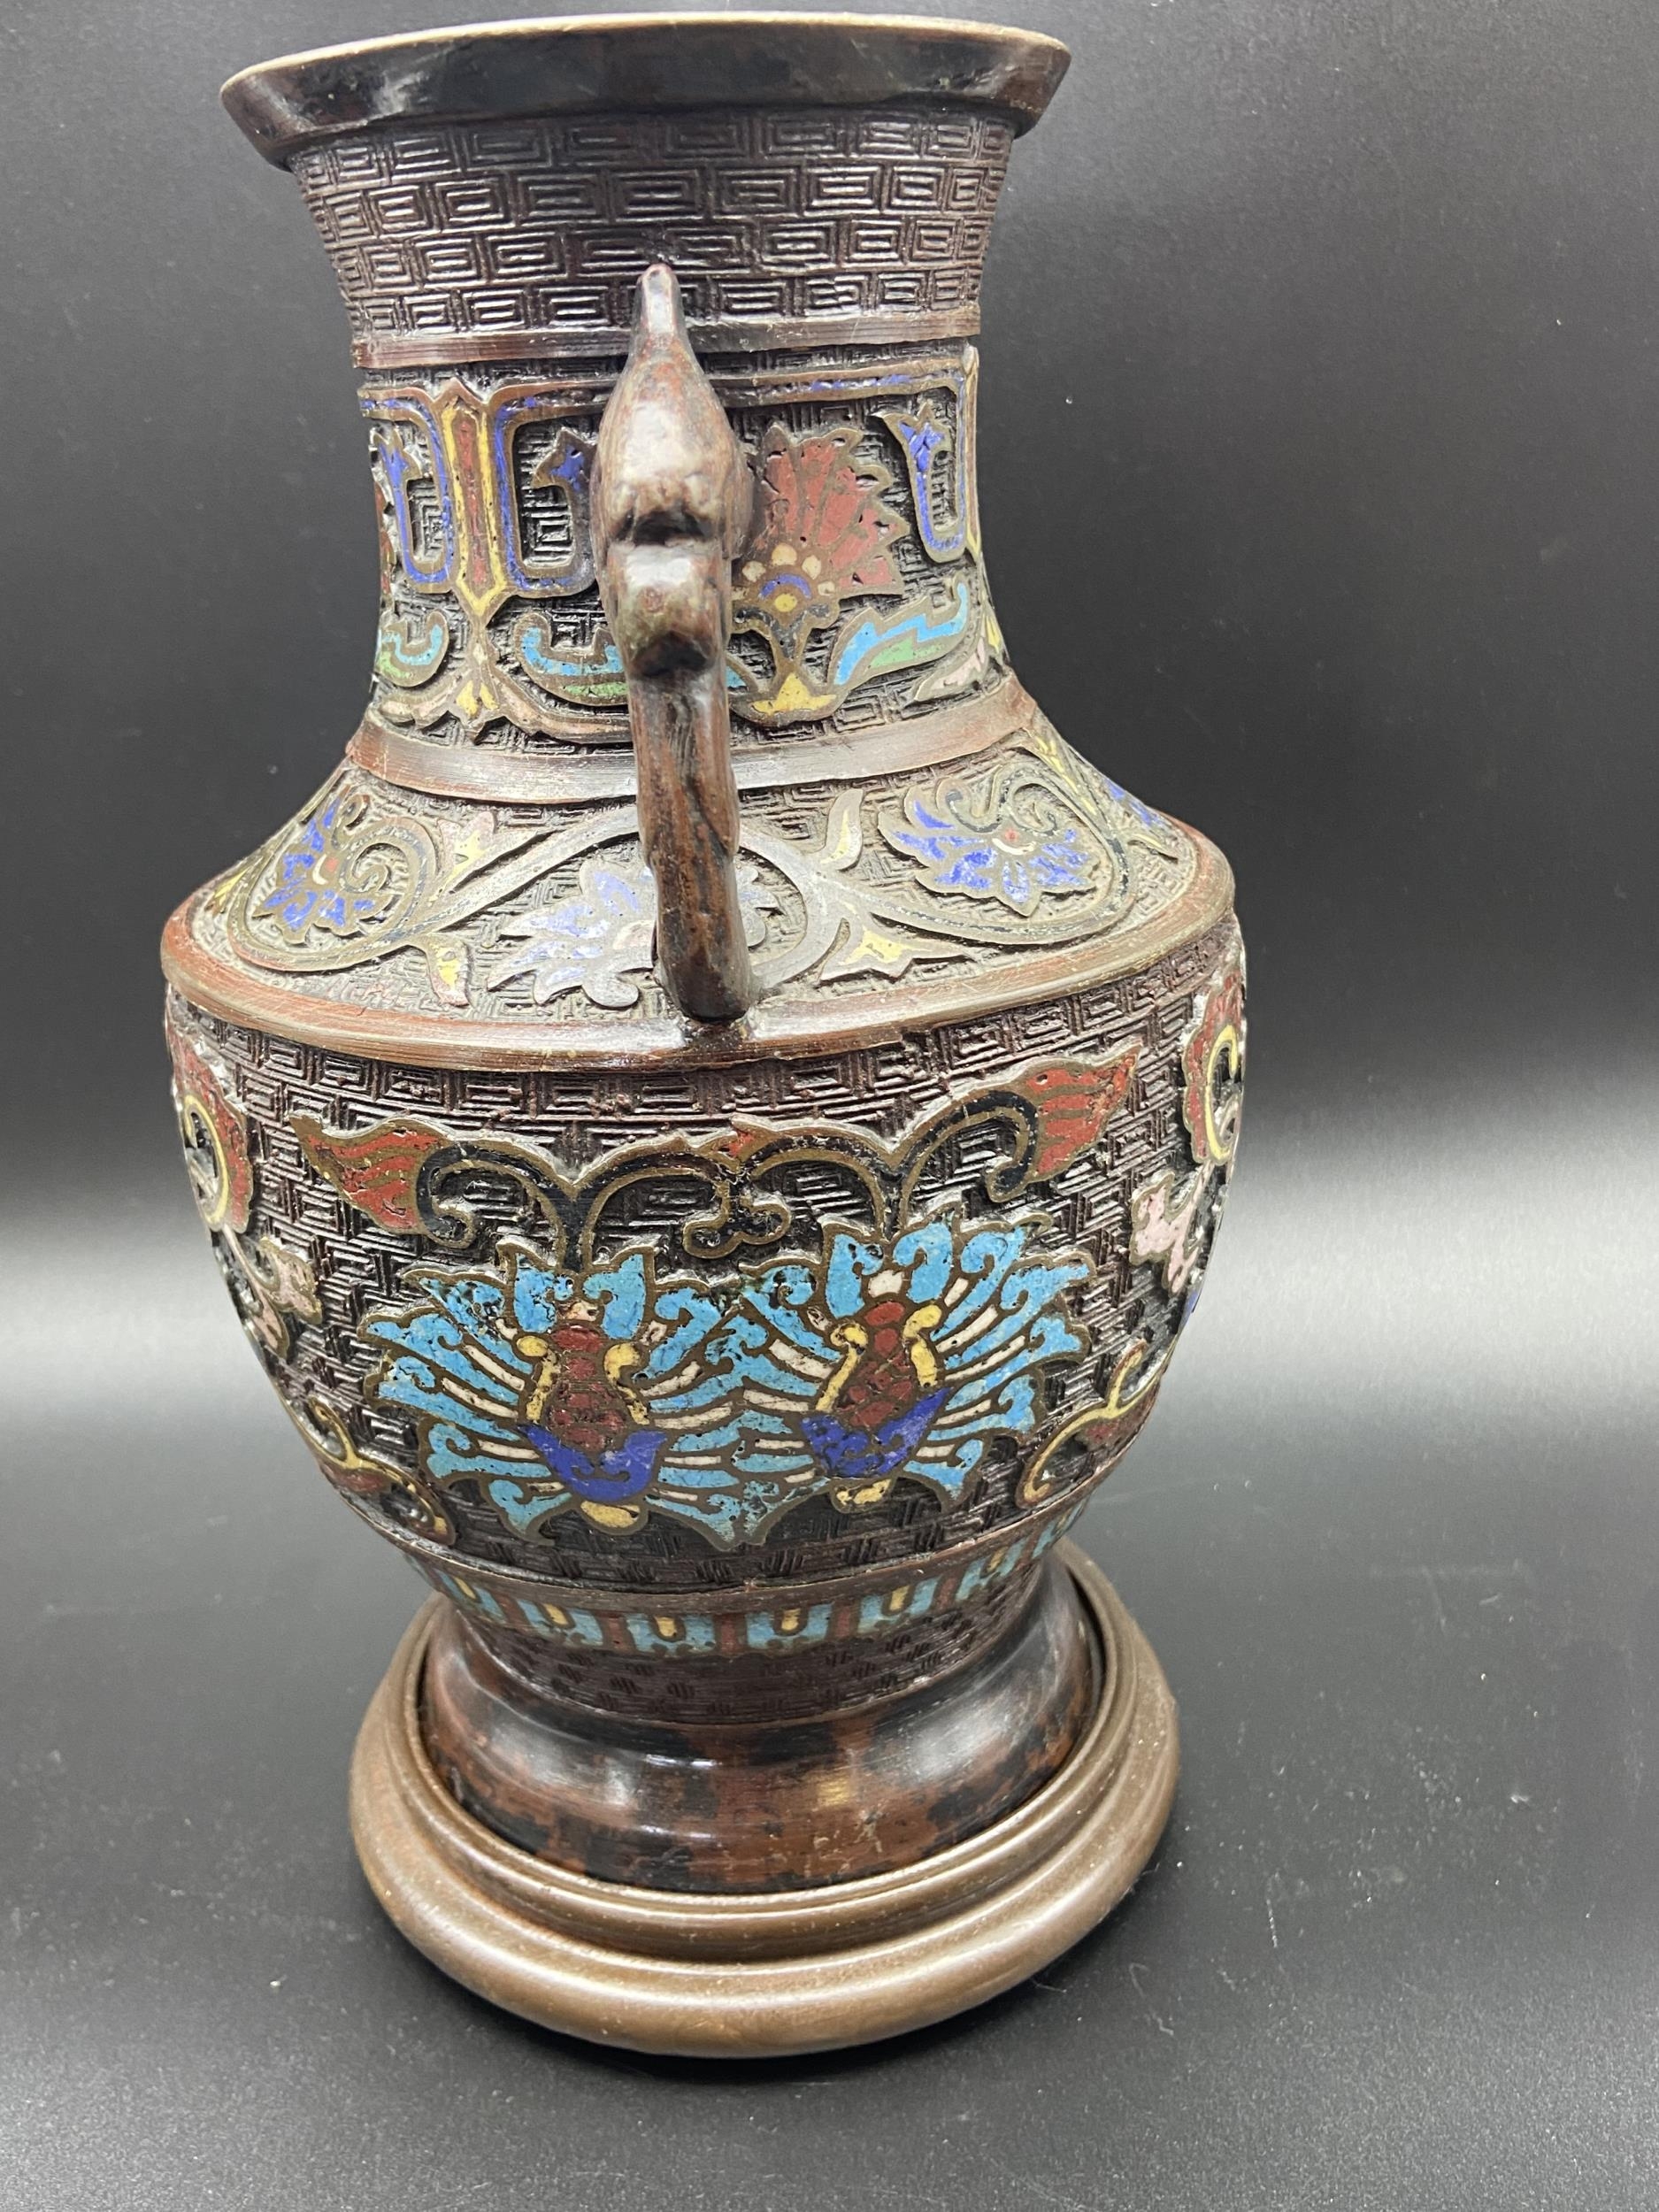 A 19th century Japanese bronze Champleve Enamel Cloisonne urn vase. Comes with wooden stand. [26cm - Image 4 of 7